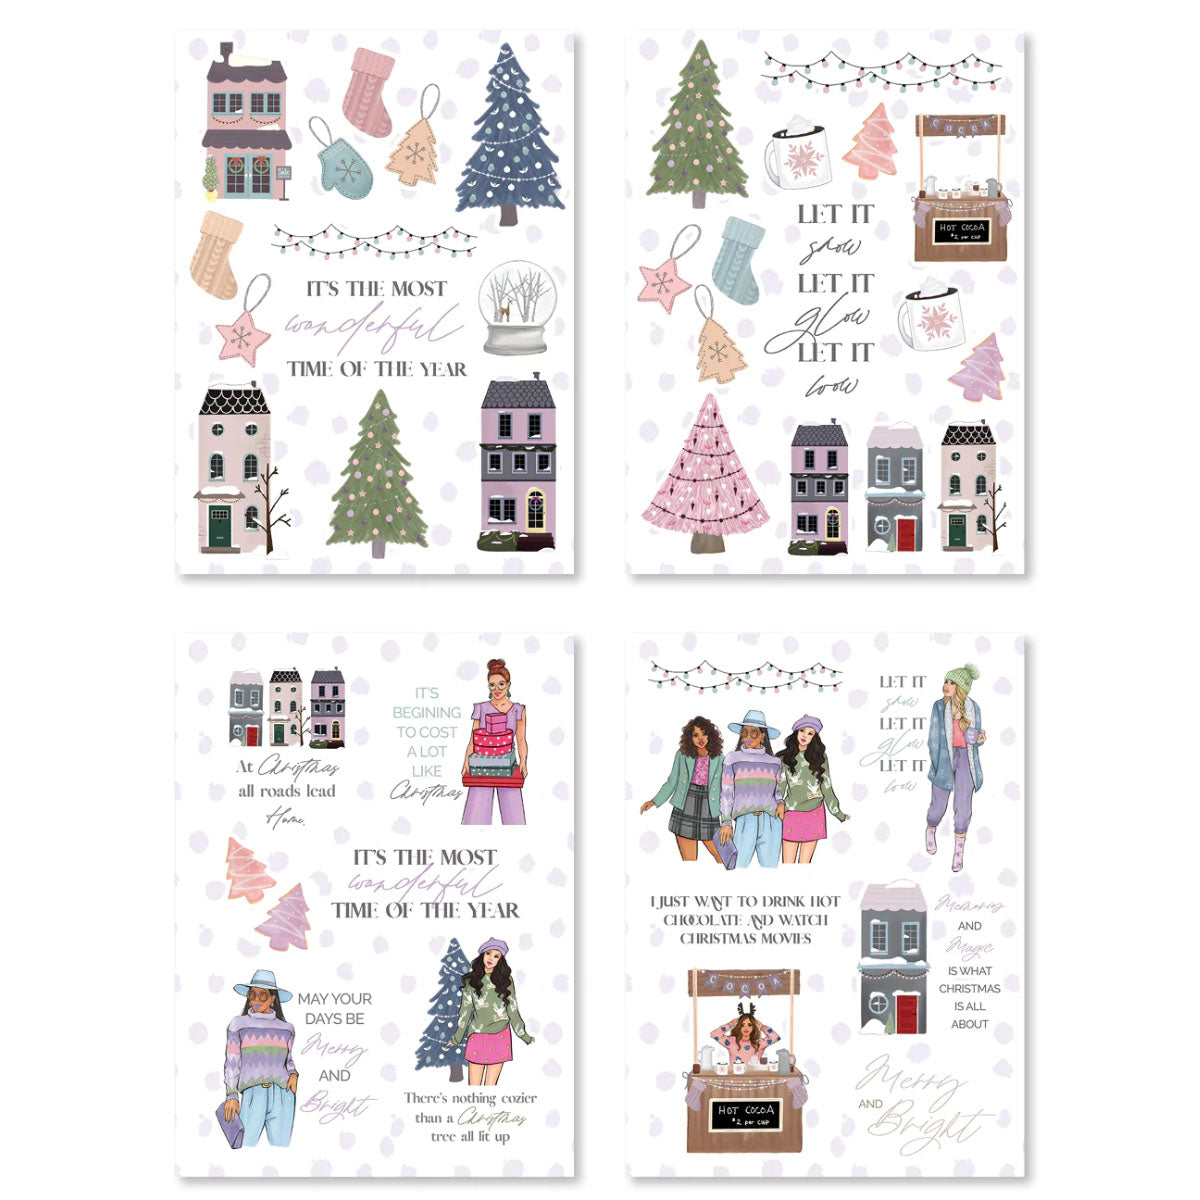 Rongrong Christmas Village Sticker Pack